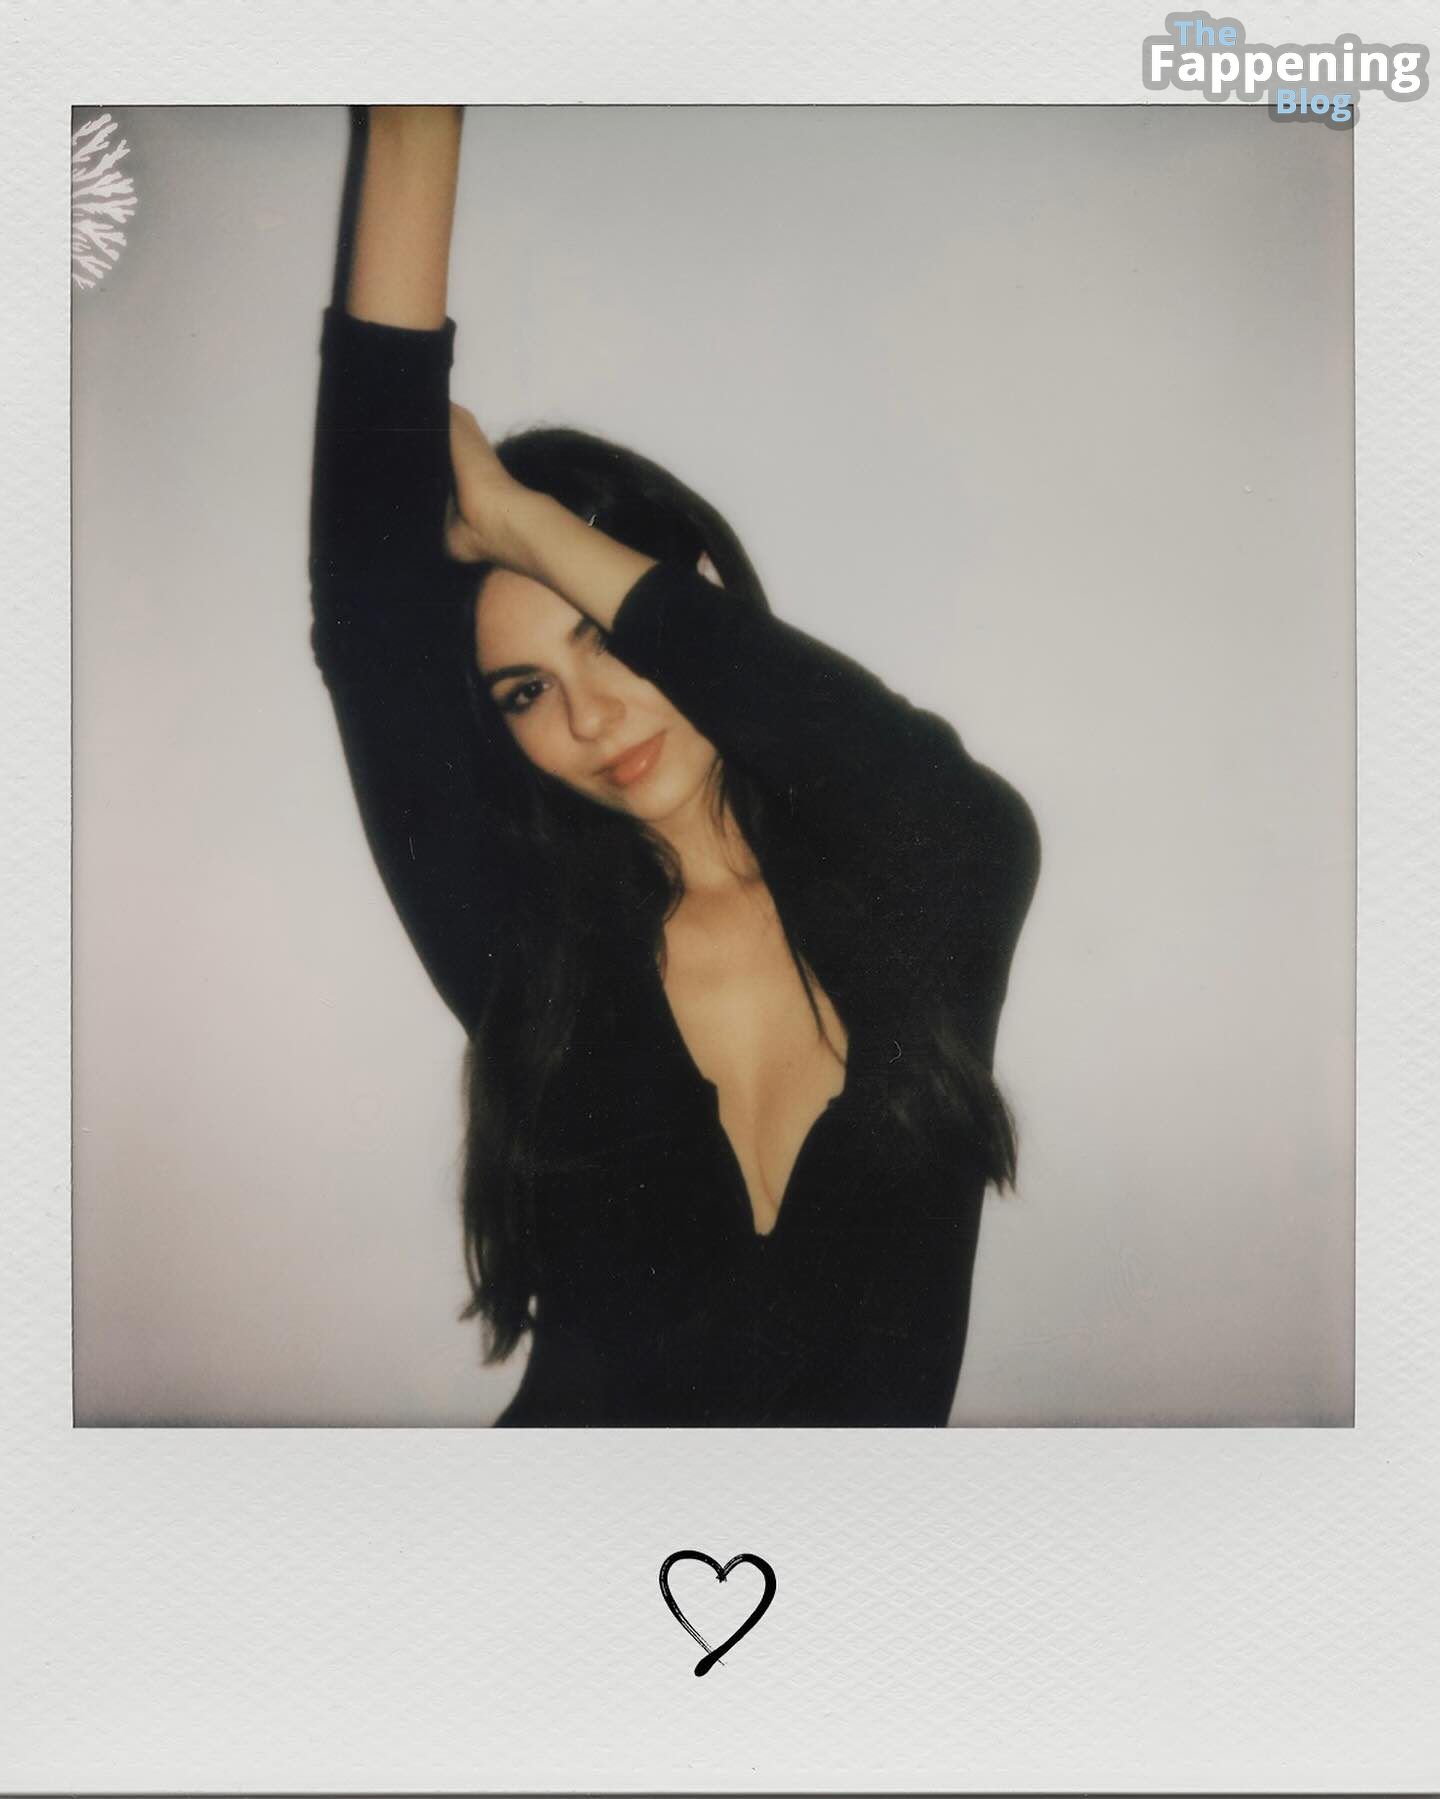 victoria-justice-topless-black-dress-sultry-polaroids-1-thefappeningblog.com_.jpg